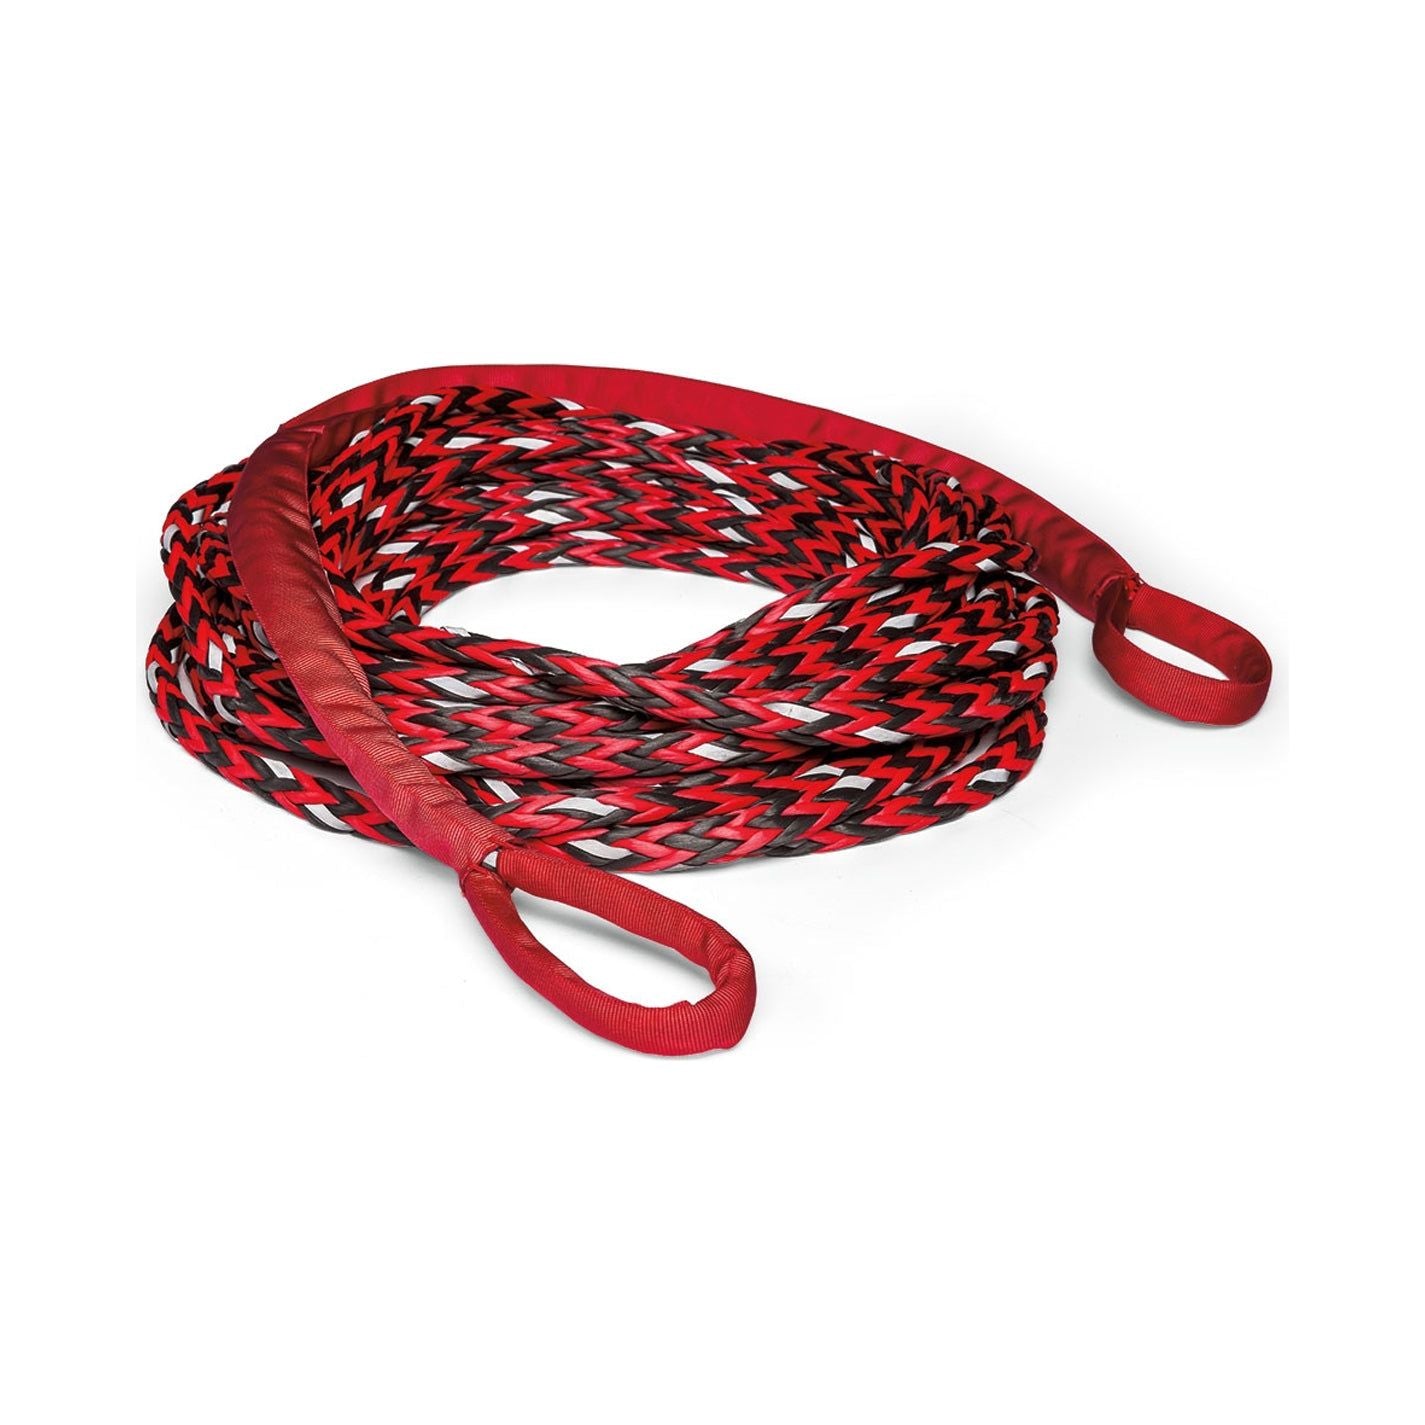 WARN 102557 - Nightline Synthetic Rope Extension